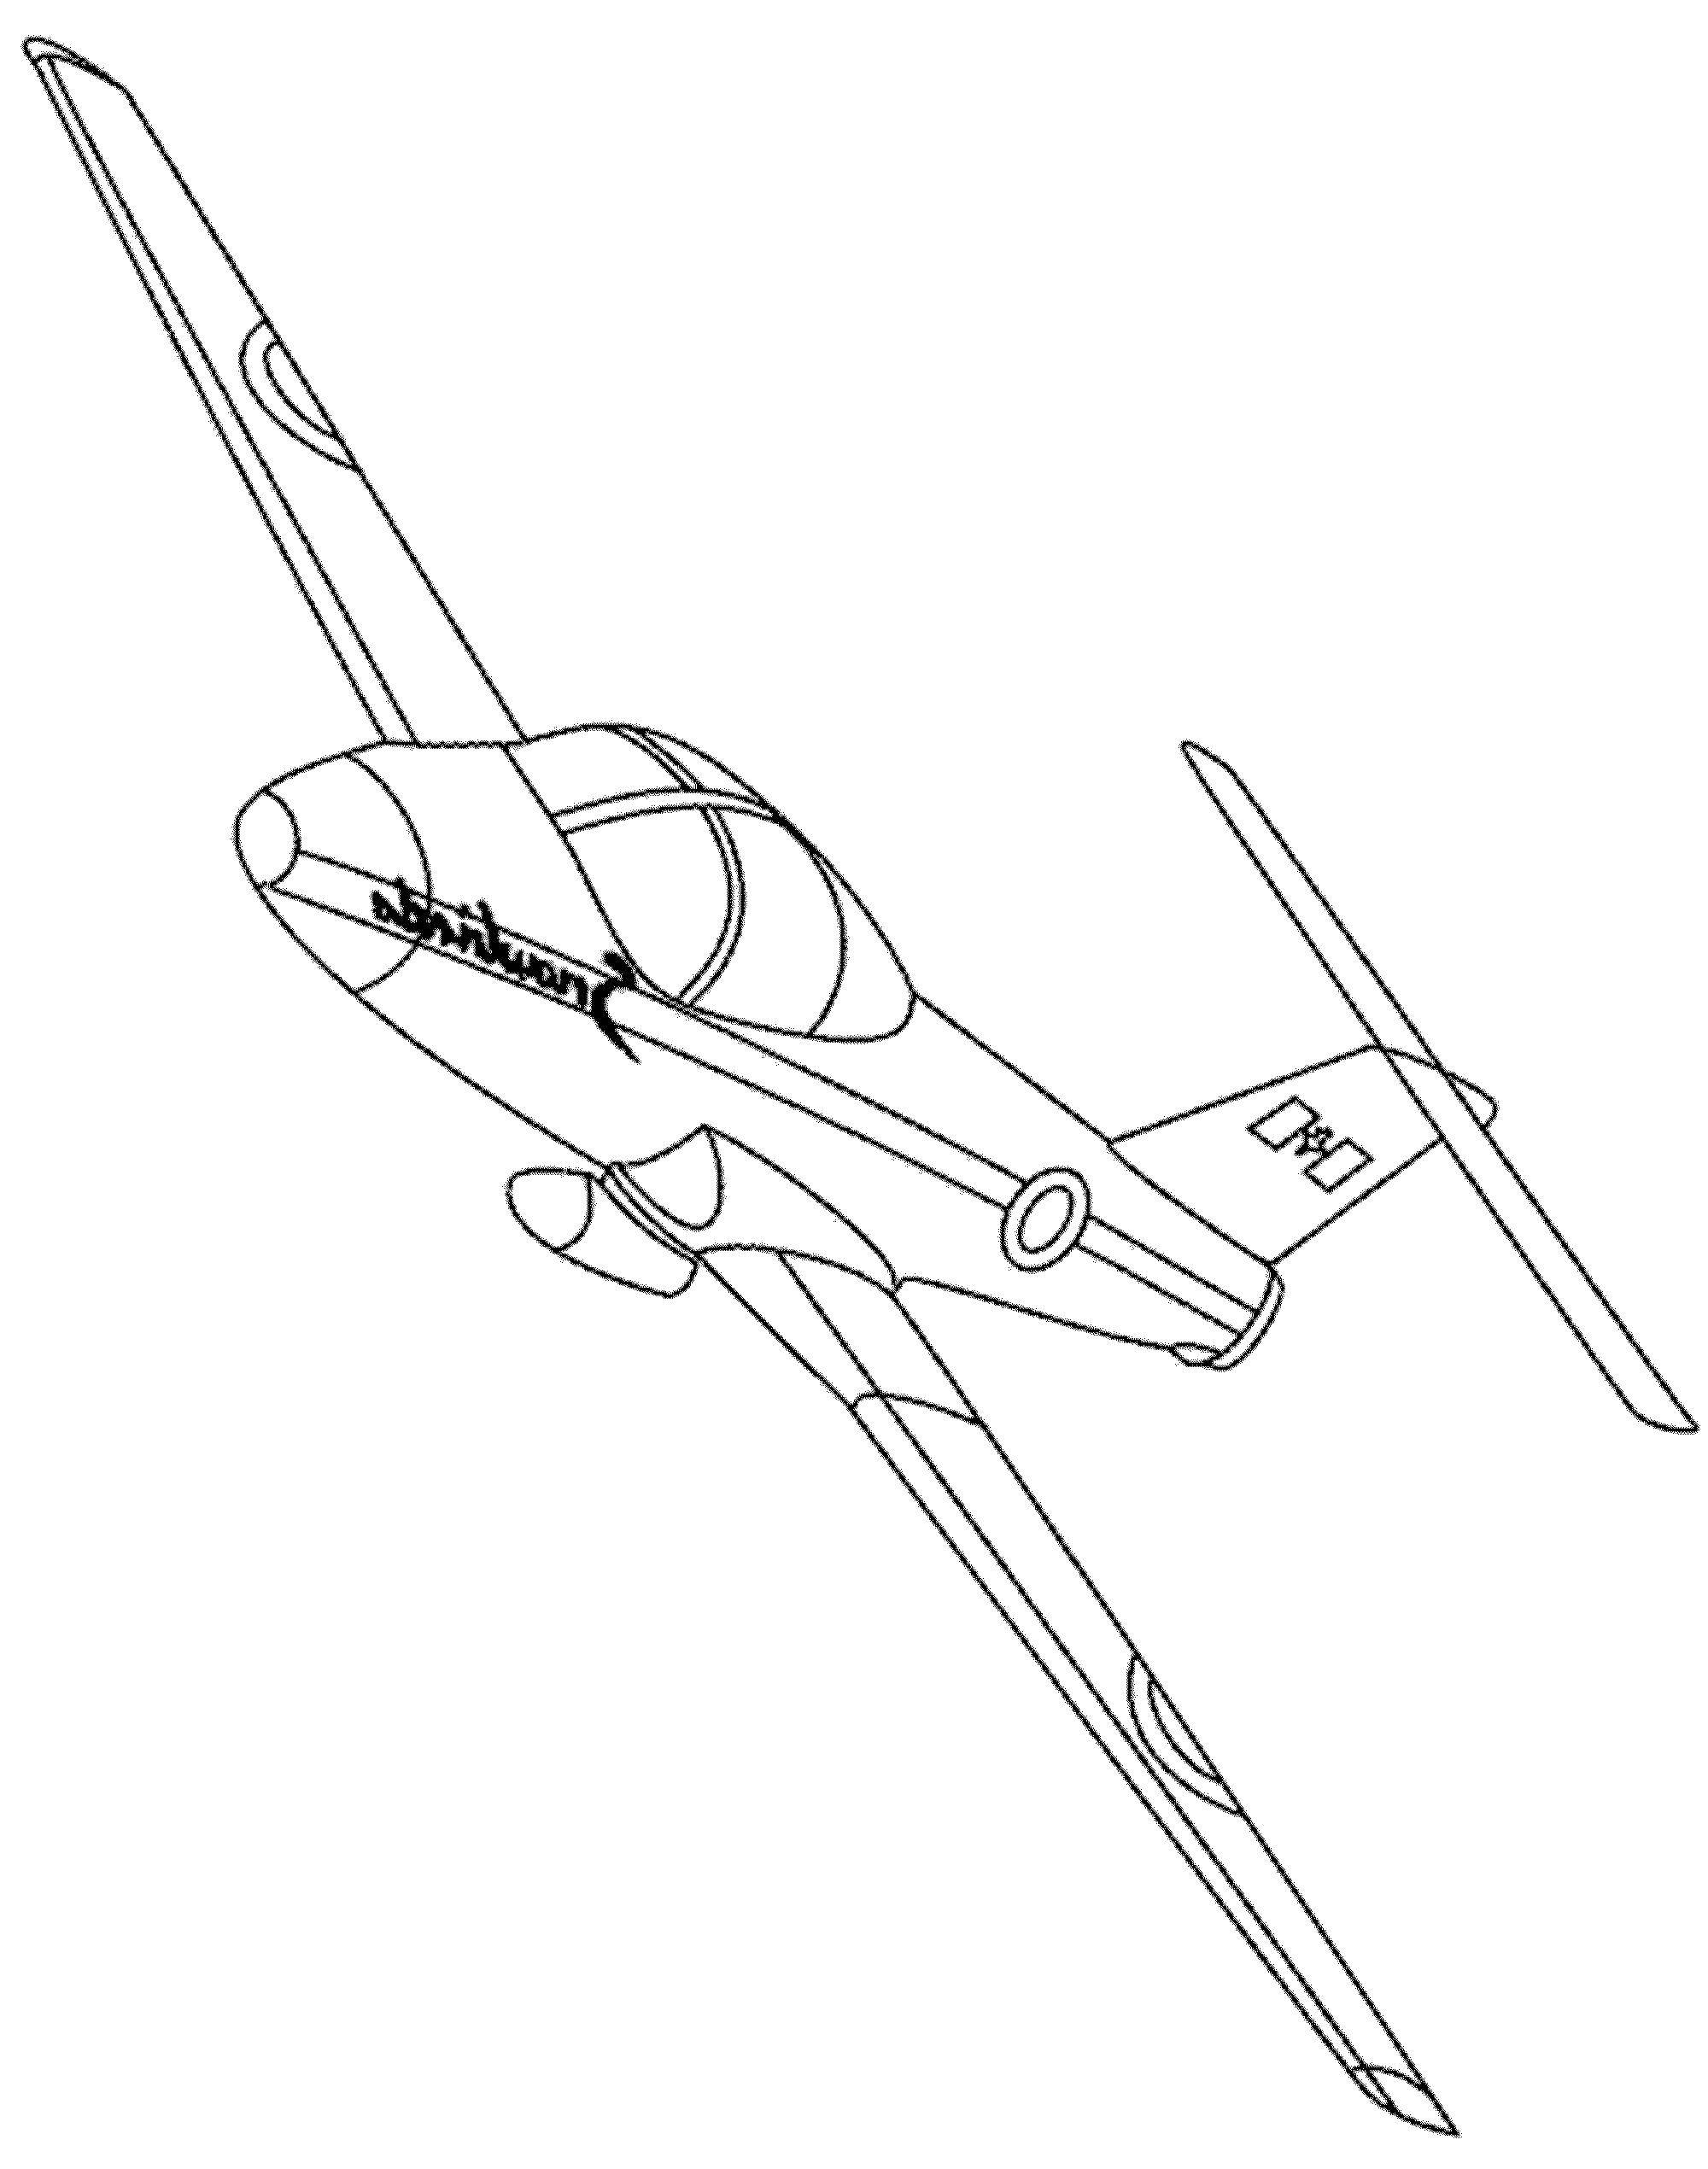 Coloring Hovering a plane. Category The planes. Tags:  Plane.